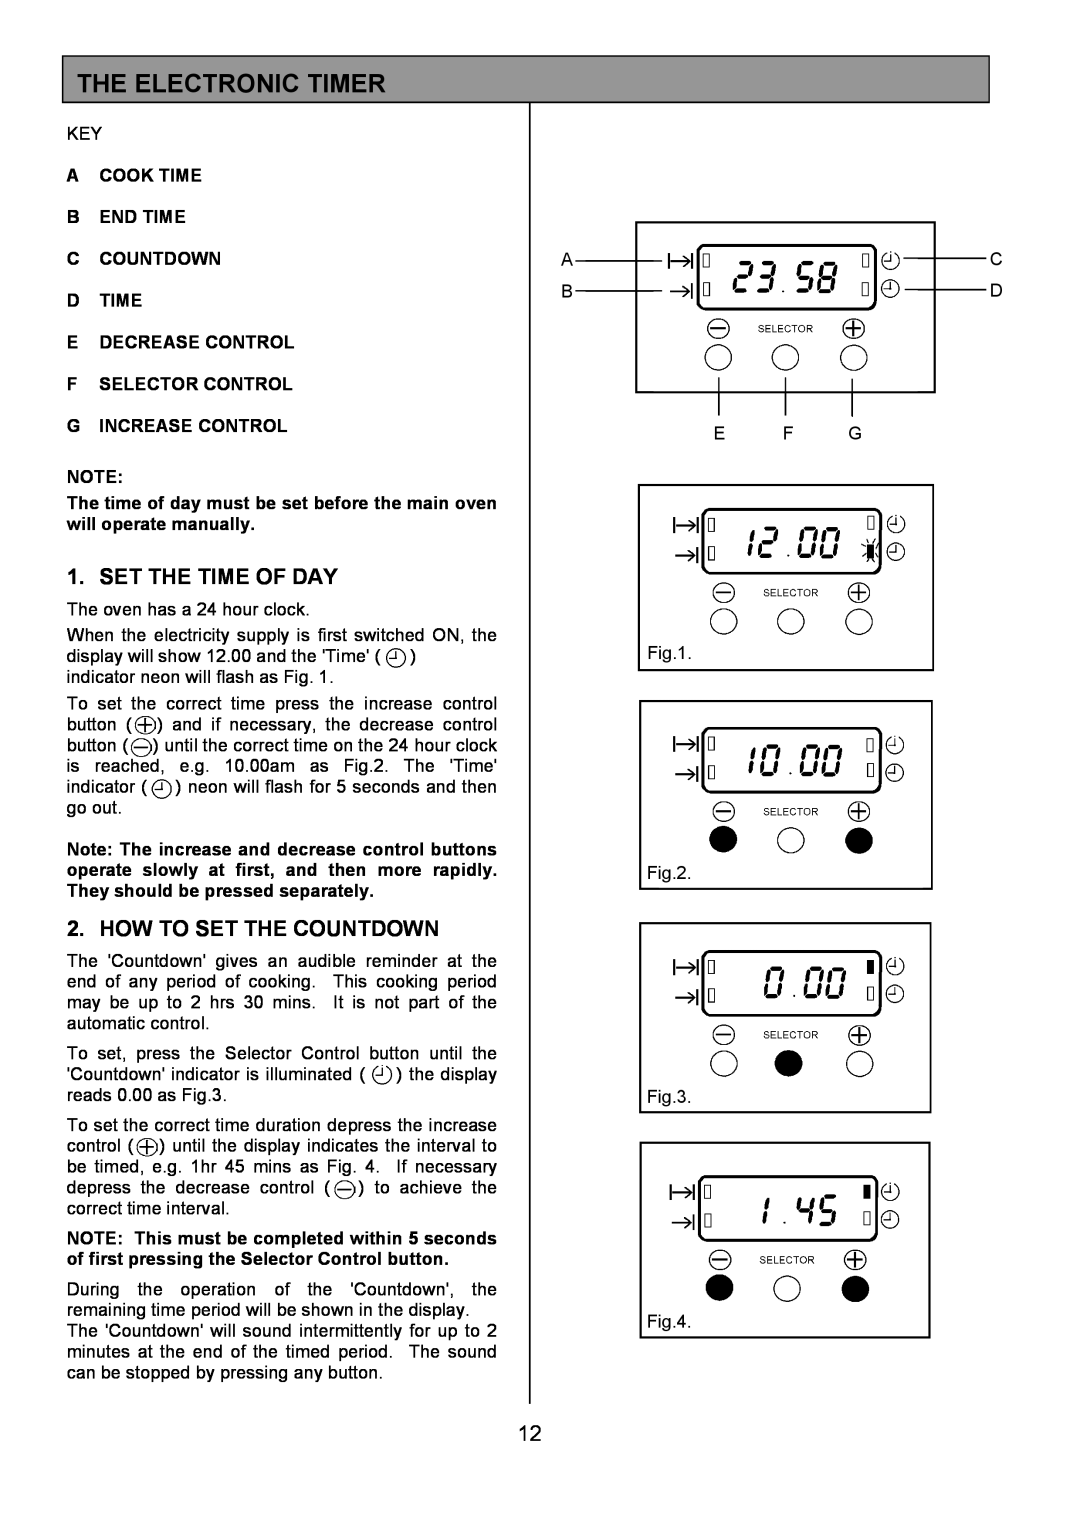 Tricity Bendix SE454 installation instructions The Electronic Timer, Set The Time Of Day, How To Set The Countdown 